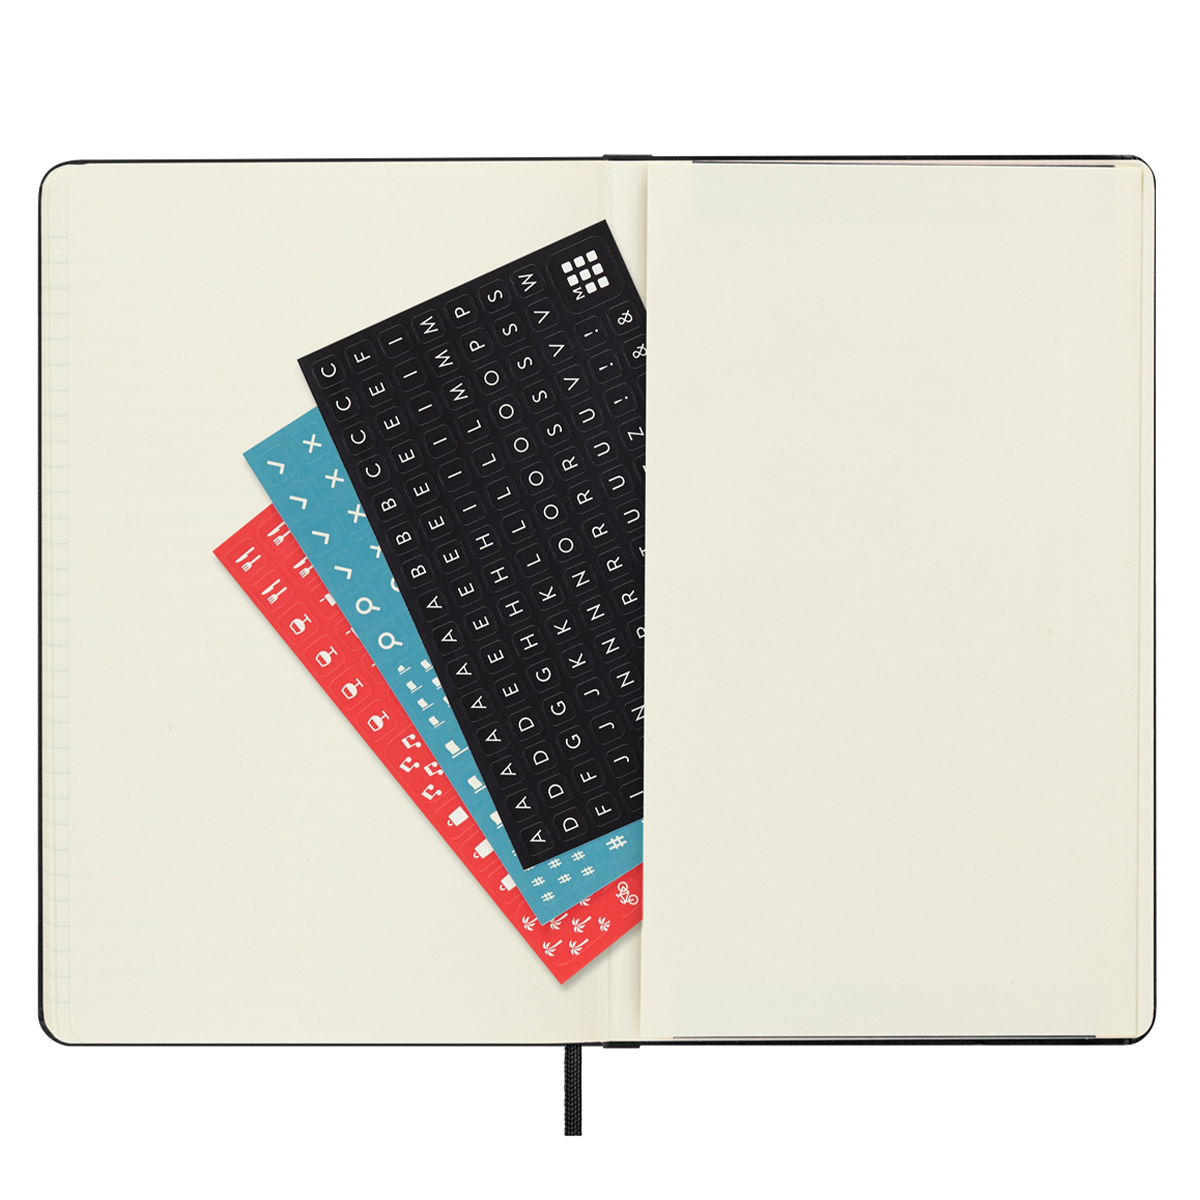 18M WeekNote Calendar Pocket Black in the group Paper & Pads / Planners / 18-Month Planners at Pen Store (128212)